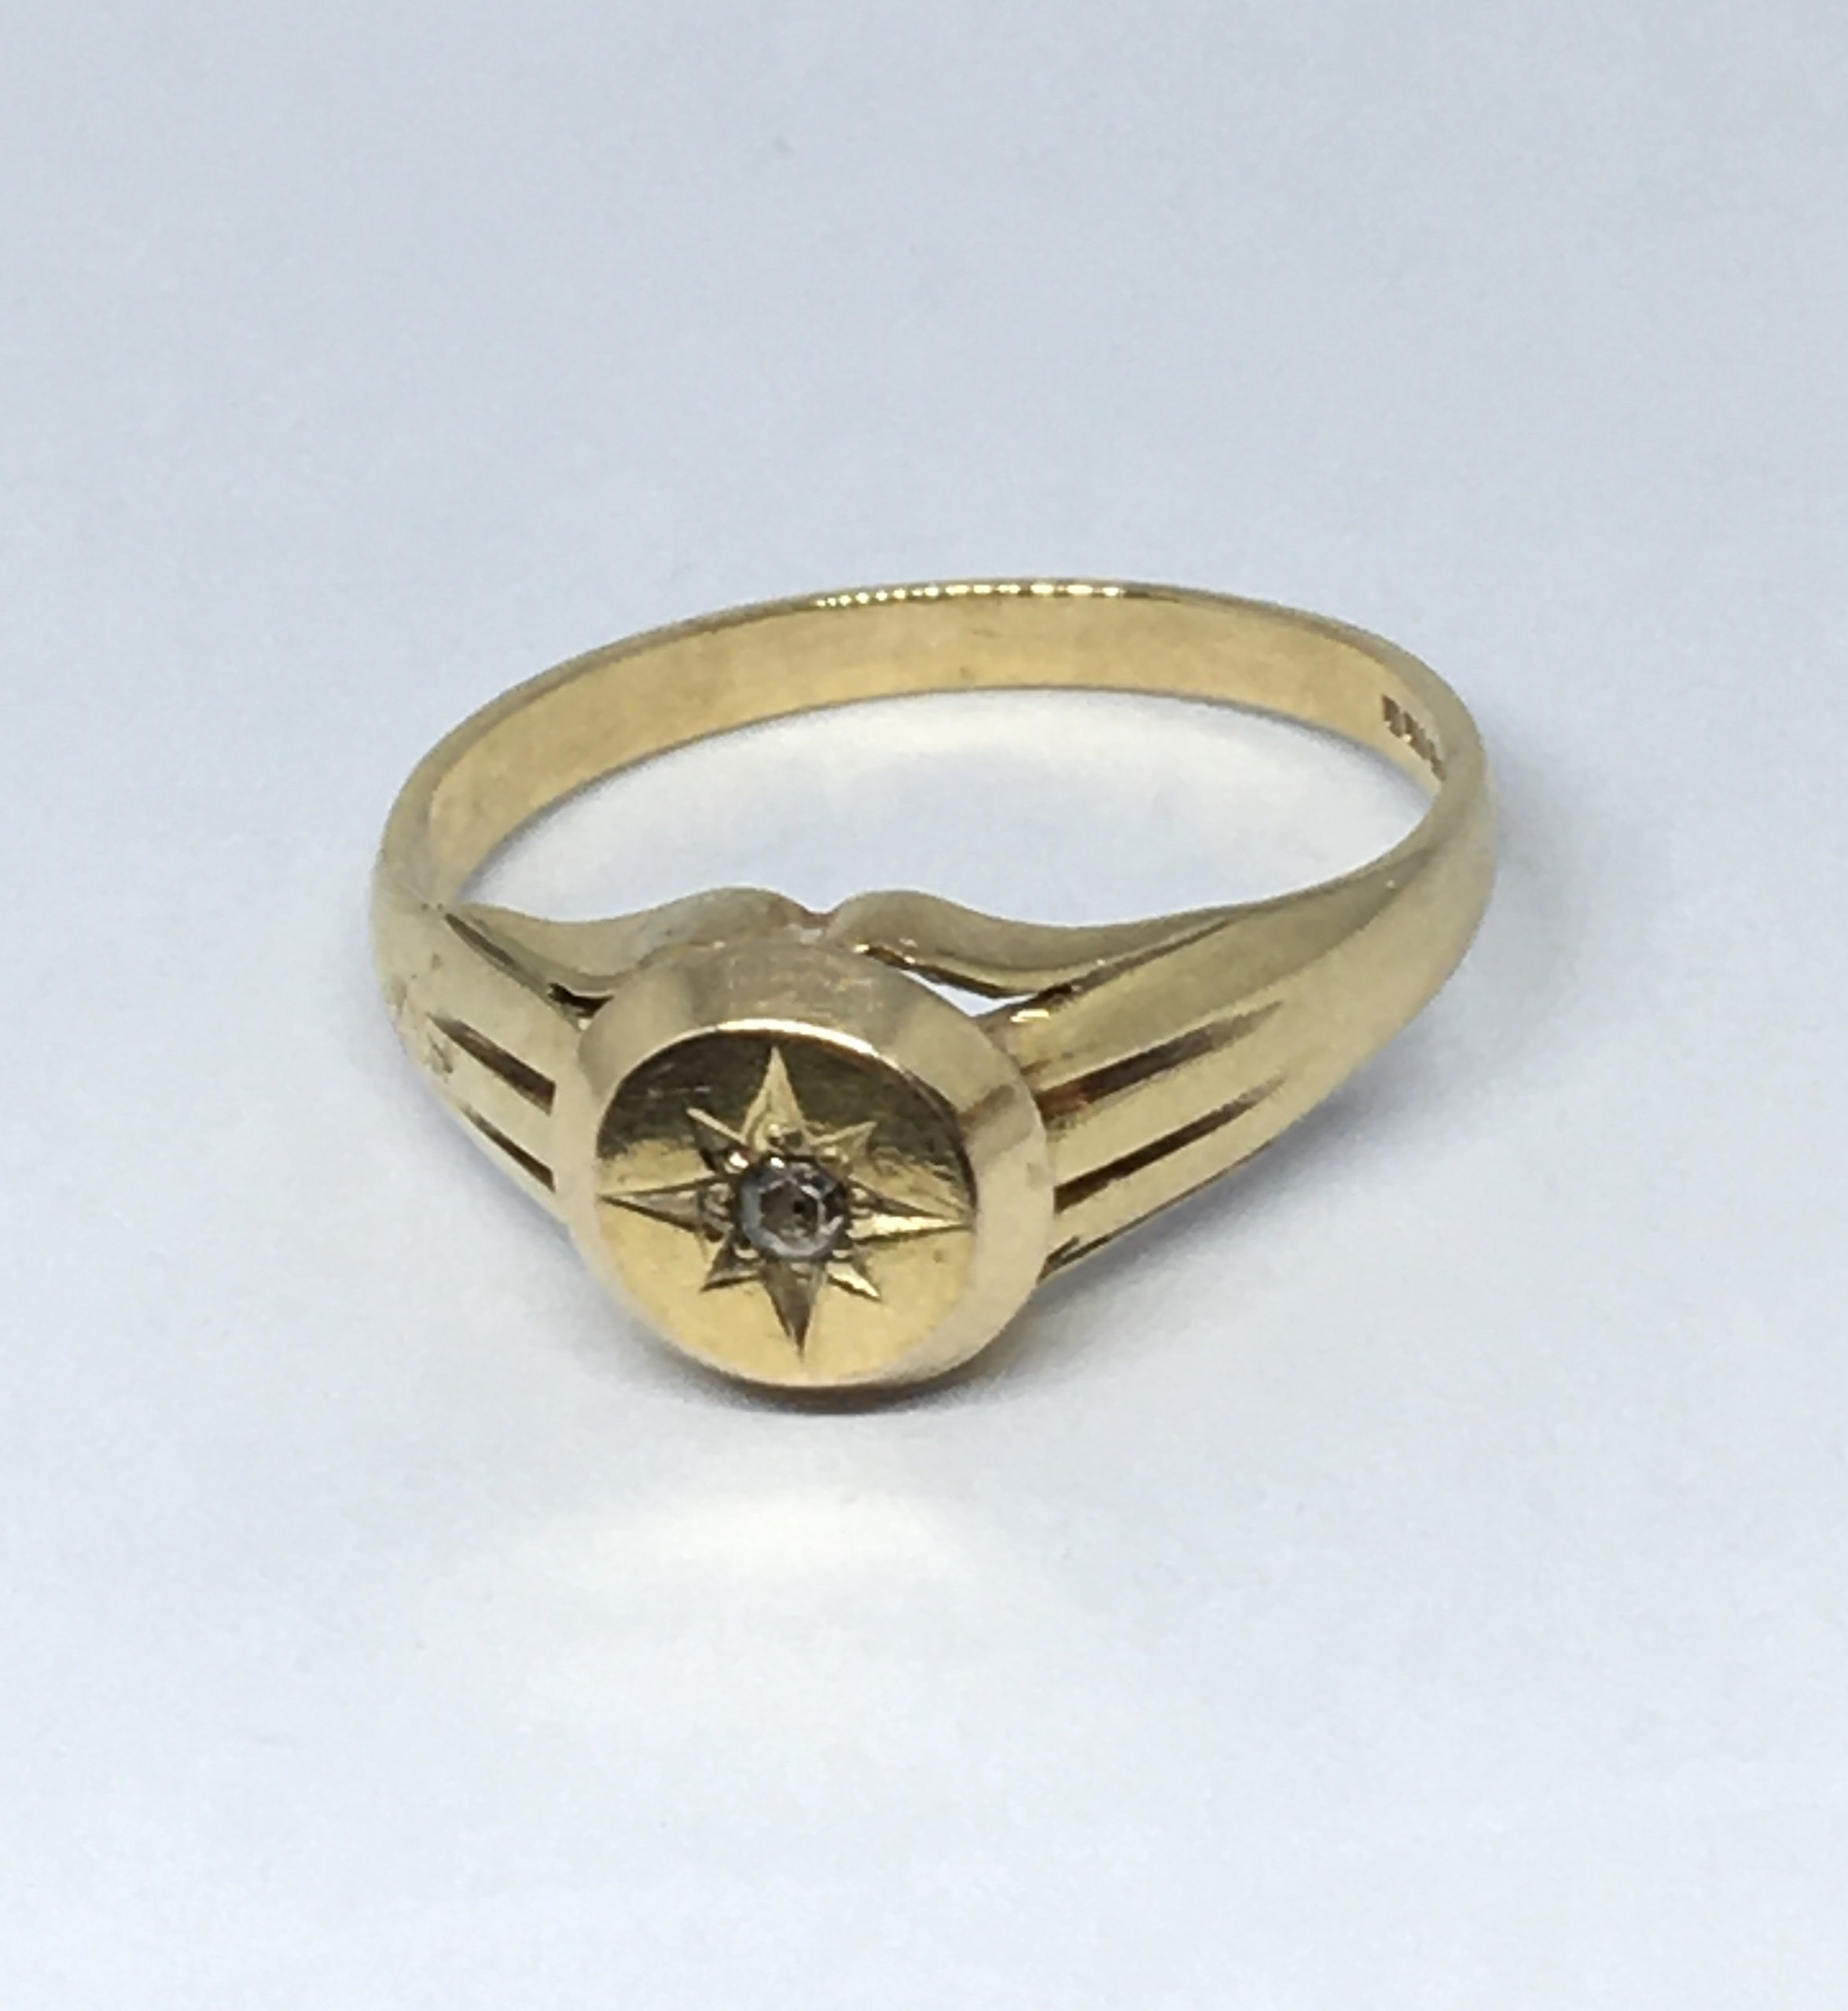 Vintage 9ct Gold Signet Ring With Central Star Set Diamond | Etsy UK